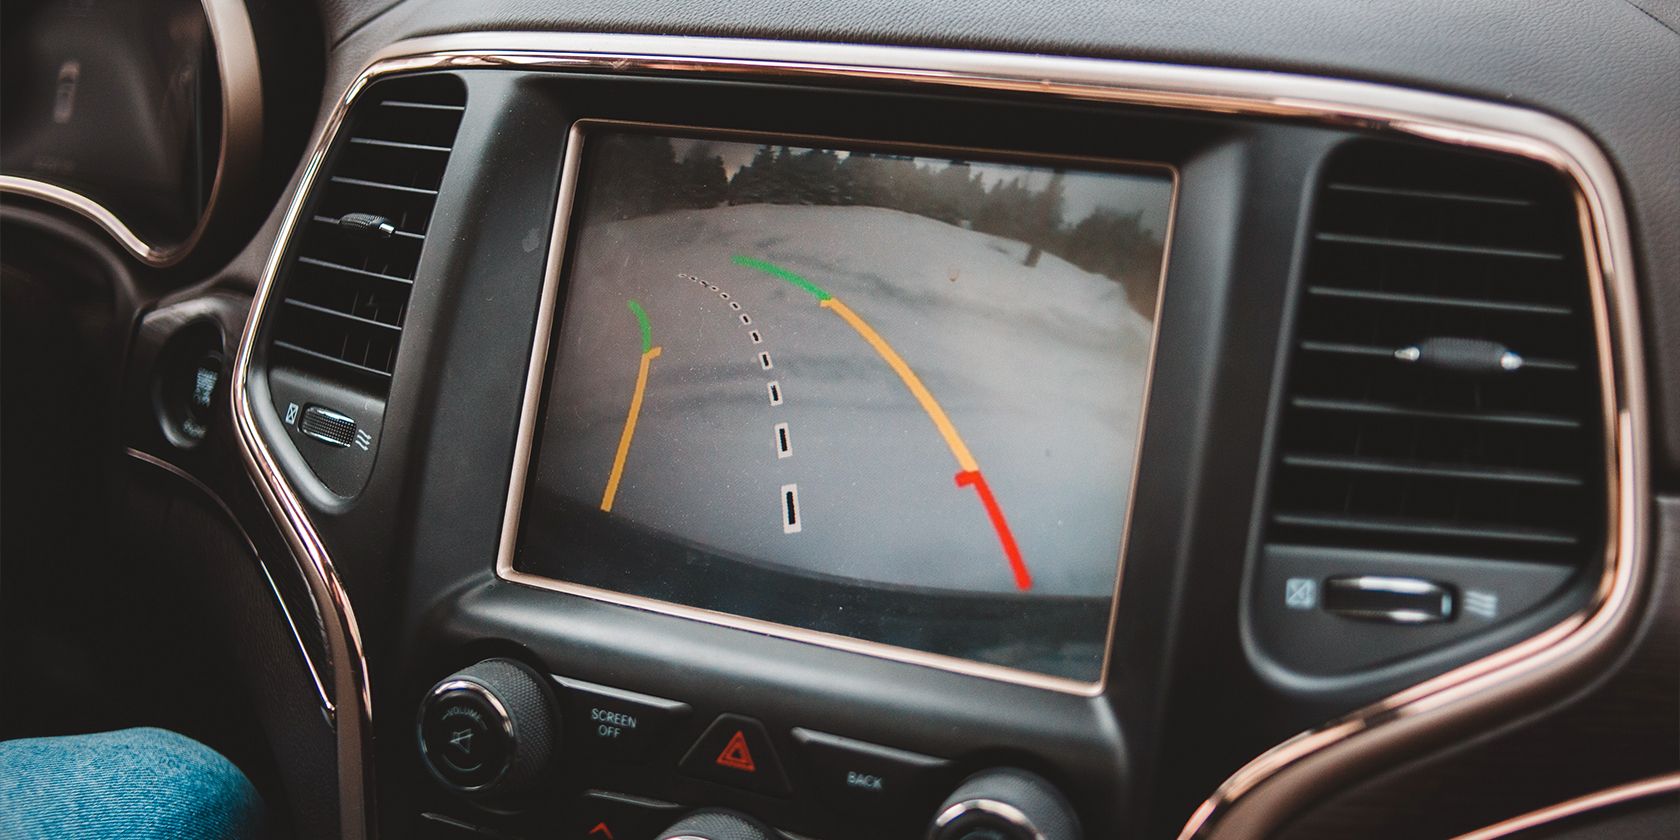 backup camera as seen from a car's entertainment system